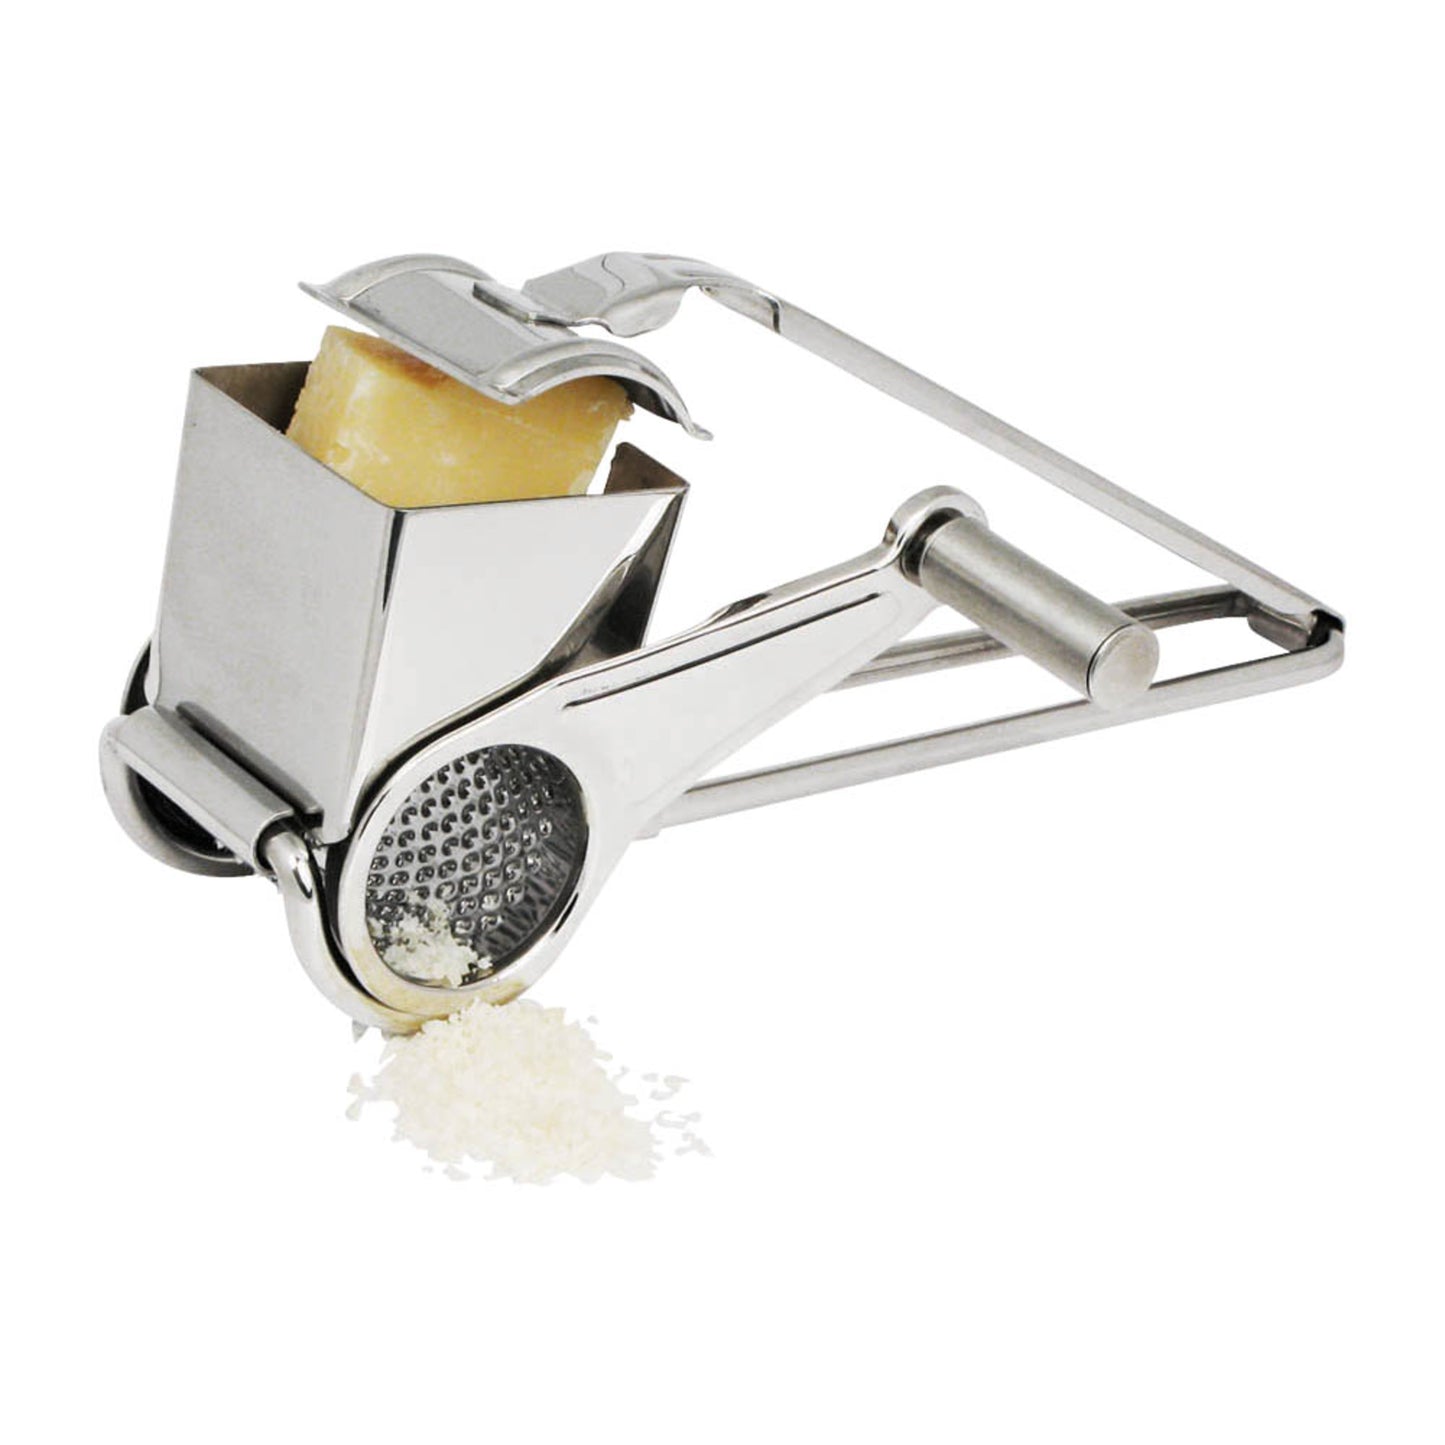 GRTS-1 - Stainless Steel Rotary Cheese Grater